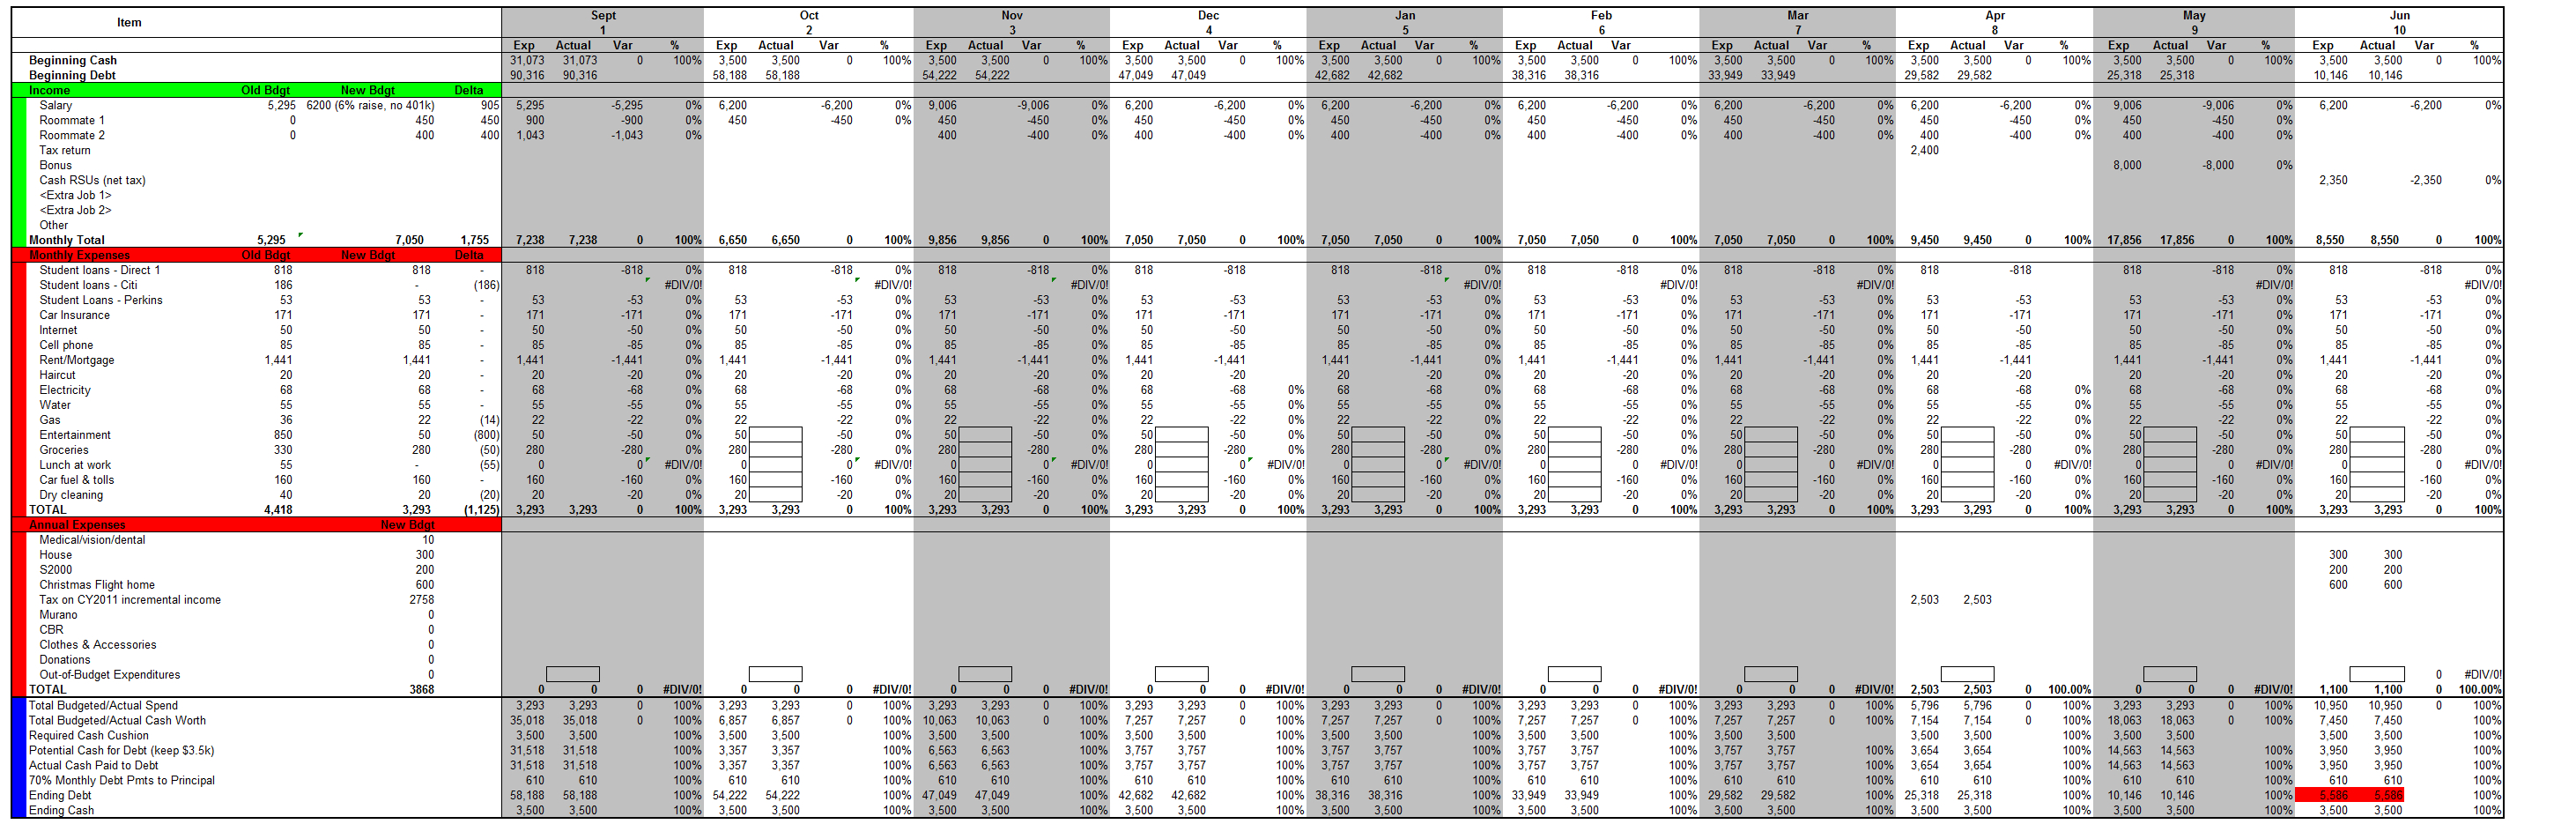 Pro Forma Income Statement Unveiled | No More Harvard Debt and Monthly Income Statement